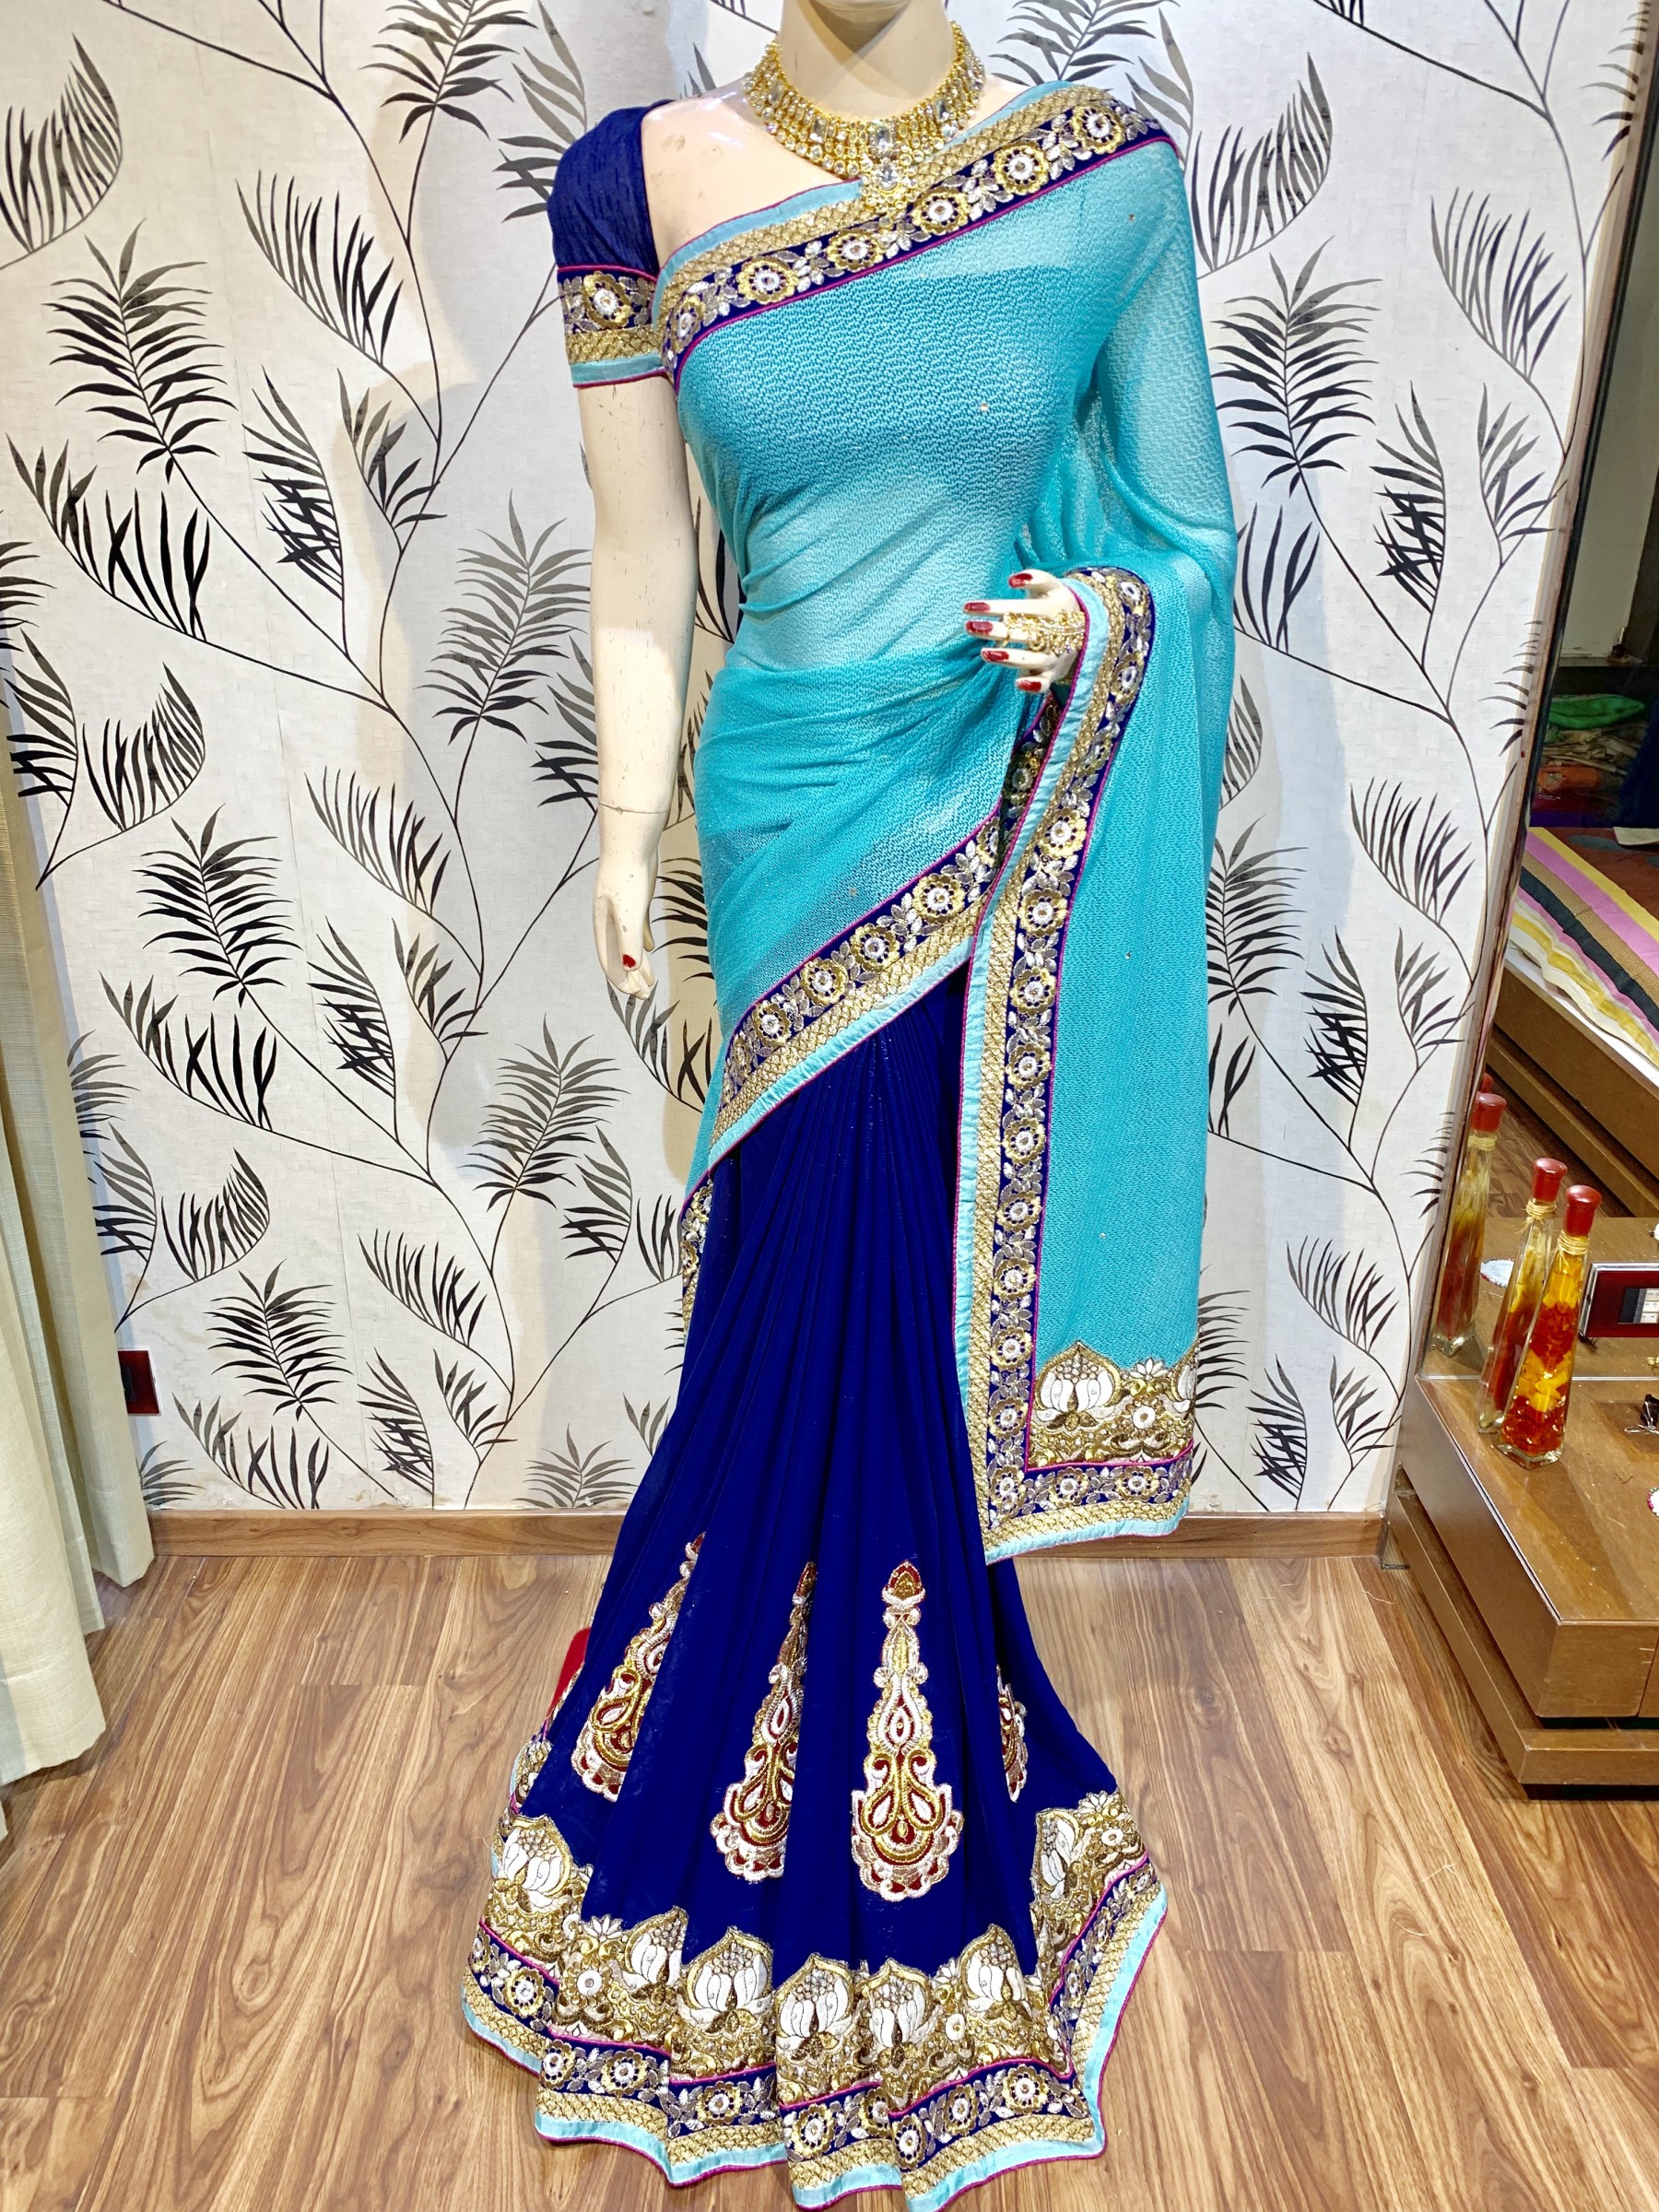 Fancy Imported Fabric Party Wear Saree In Blue WIth Embroidery Work & Crystals Stone Work